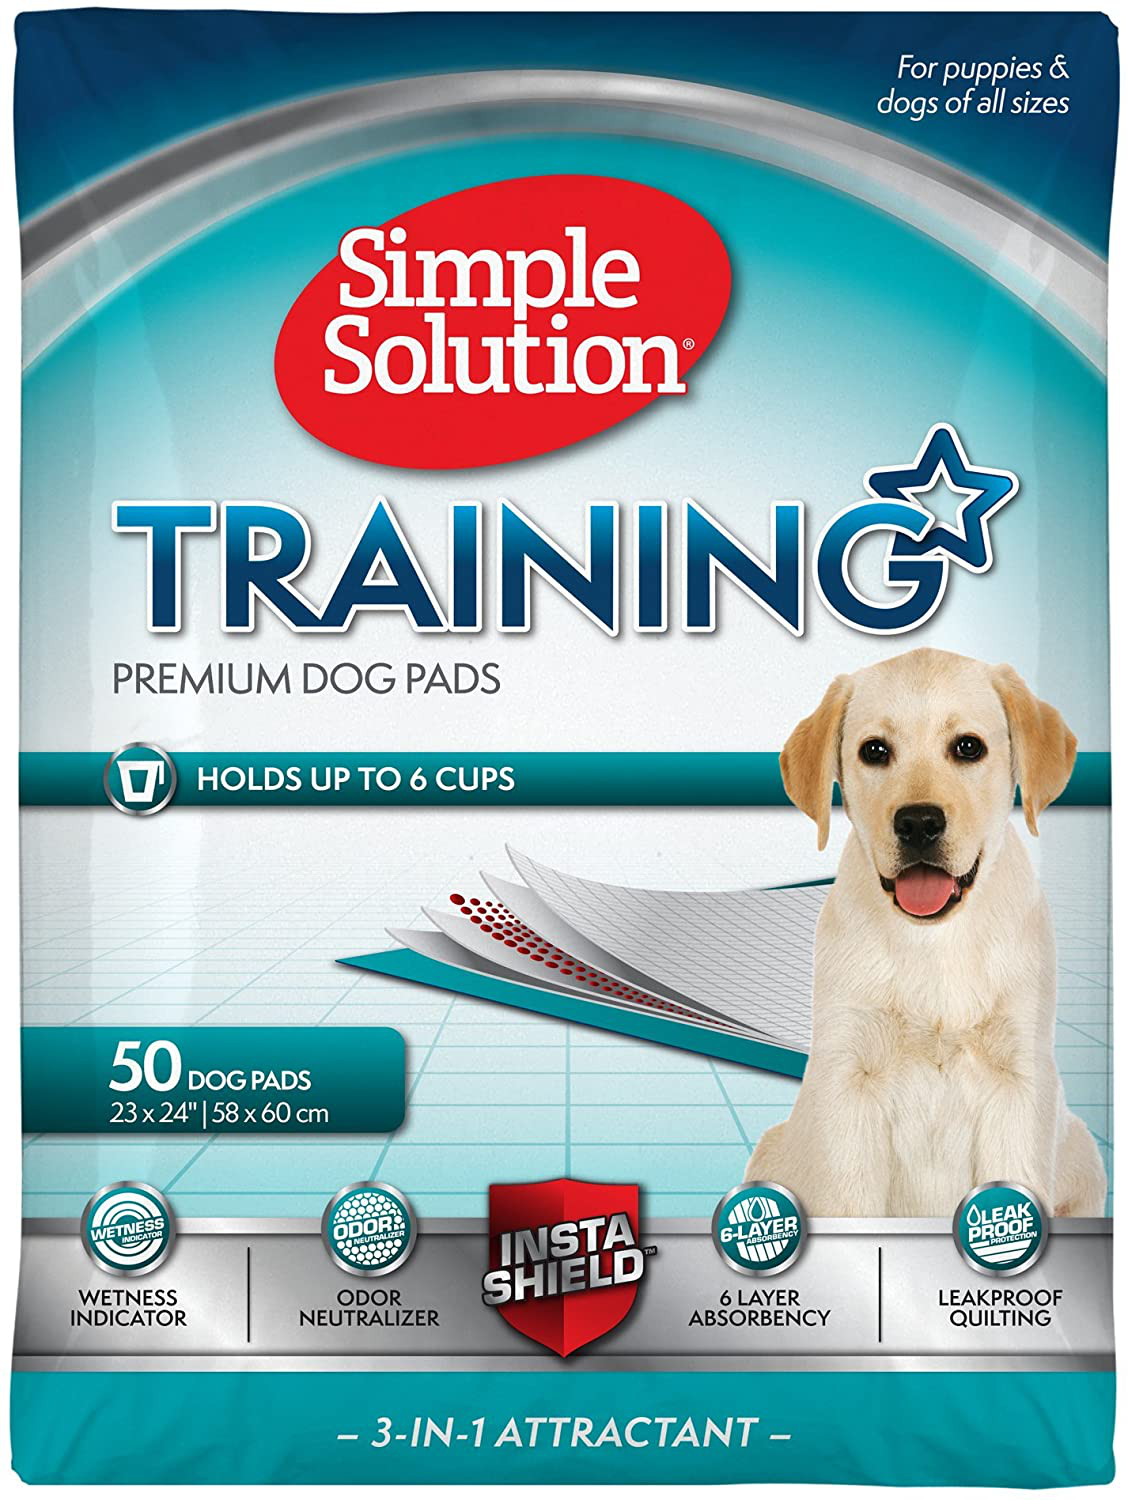 Simple Solution Training Puppy Pads | 6 Layer Dog Pee Pads, Absorbs up to 6 Cups of Liquid | 23X24 Inches